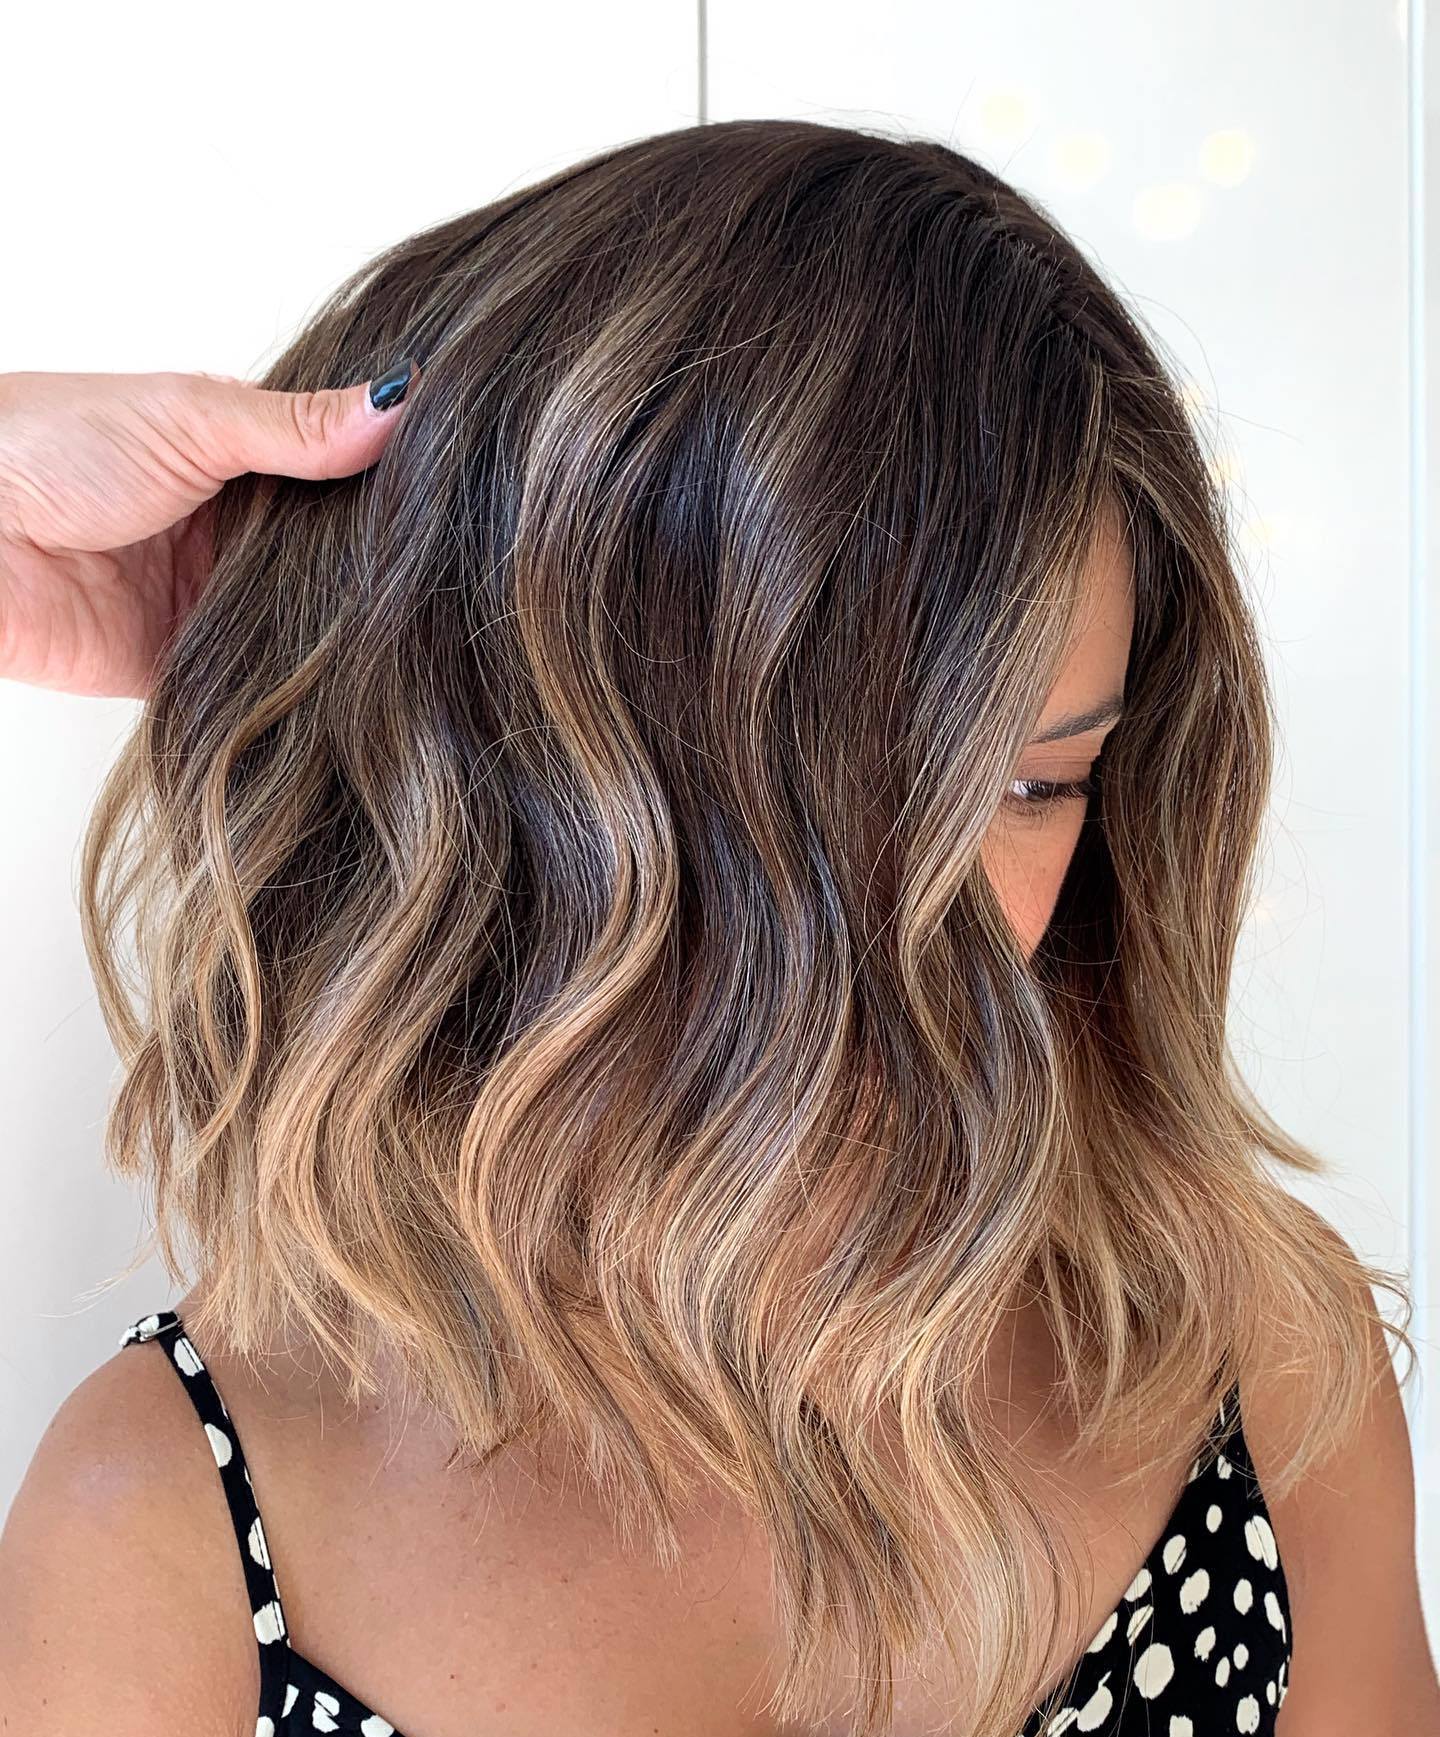 Short Wavy Hairstyle with Partial Highlights